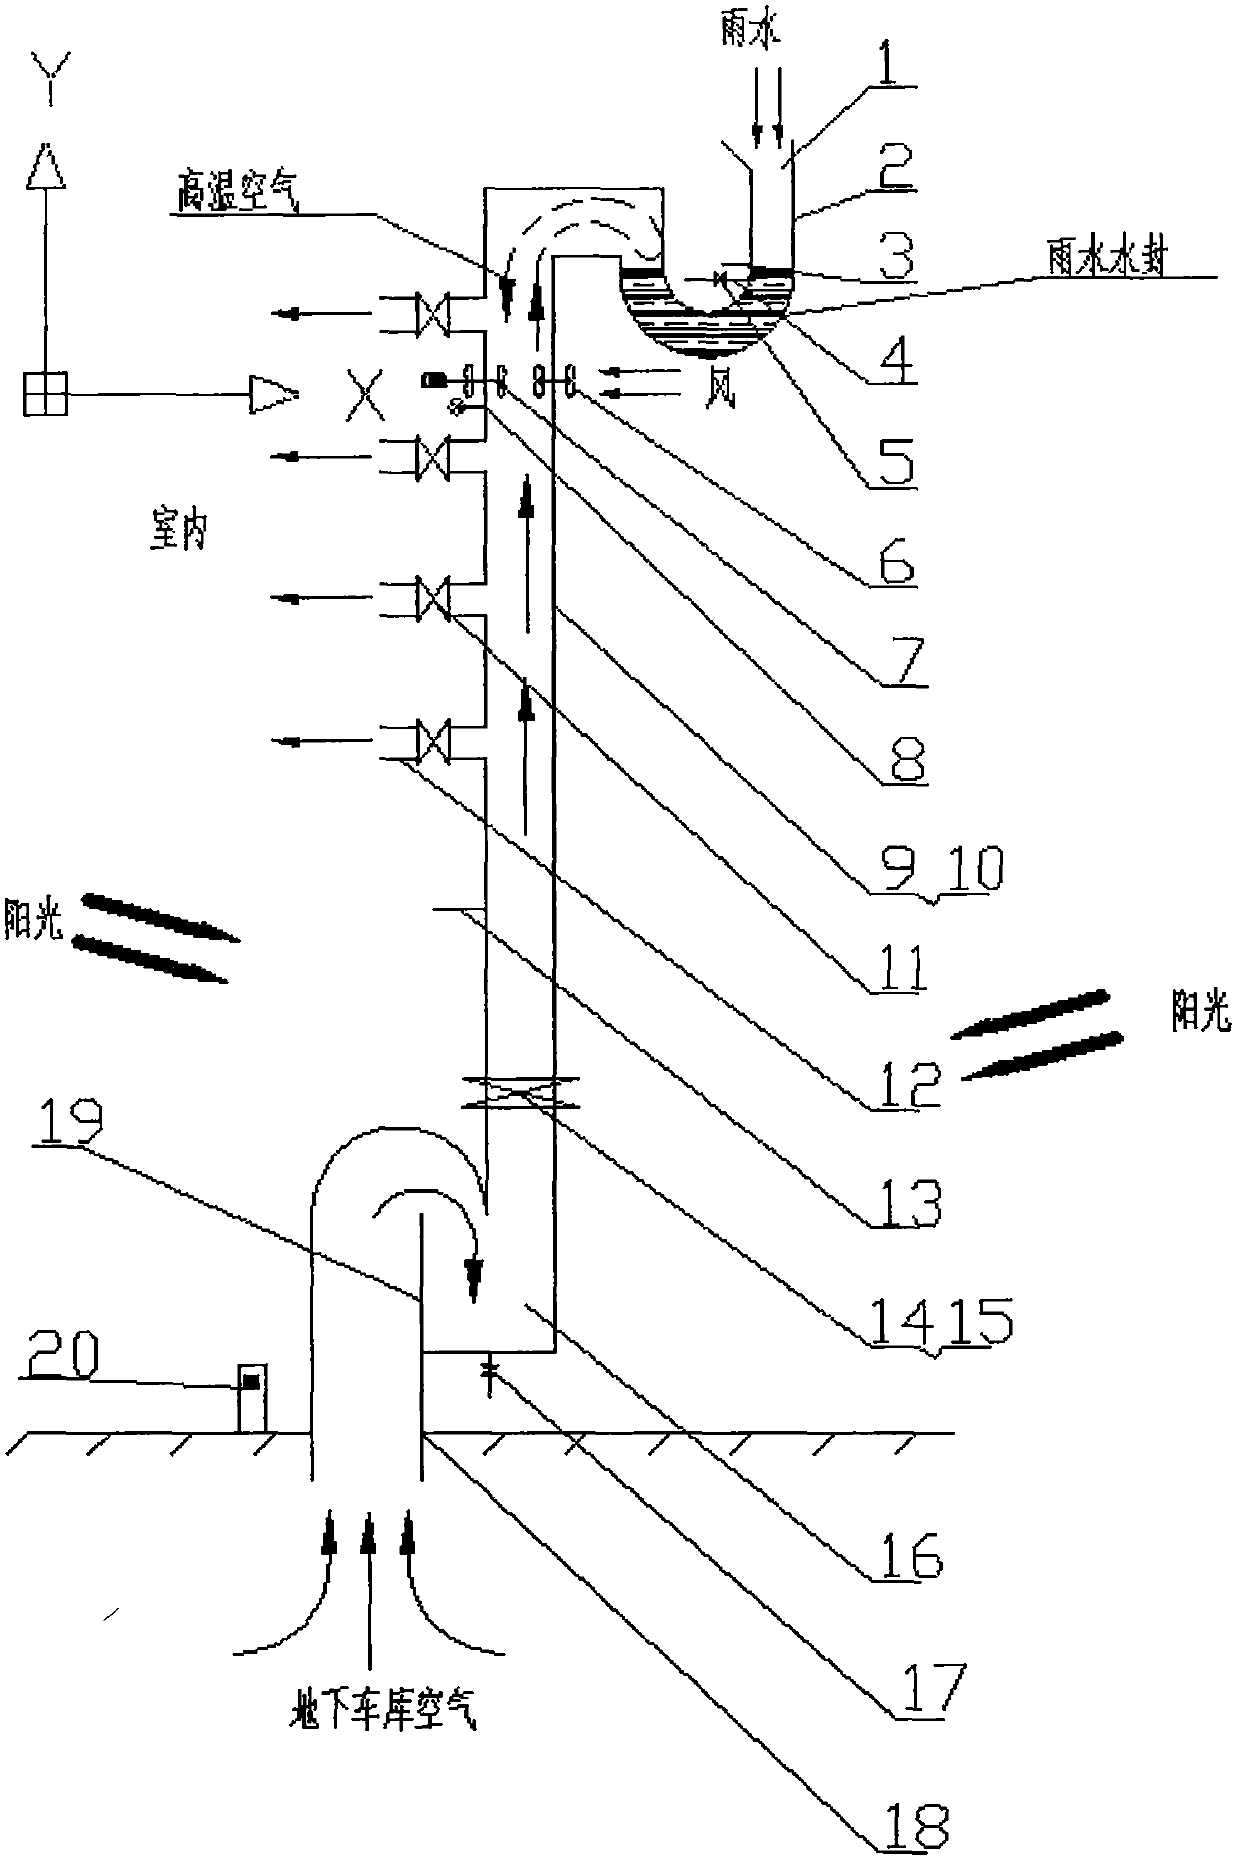 A multi-channel heat collection, ventilation and drainage device utilizing the combined effects of solar energy and wind energy